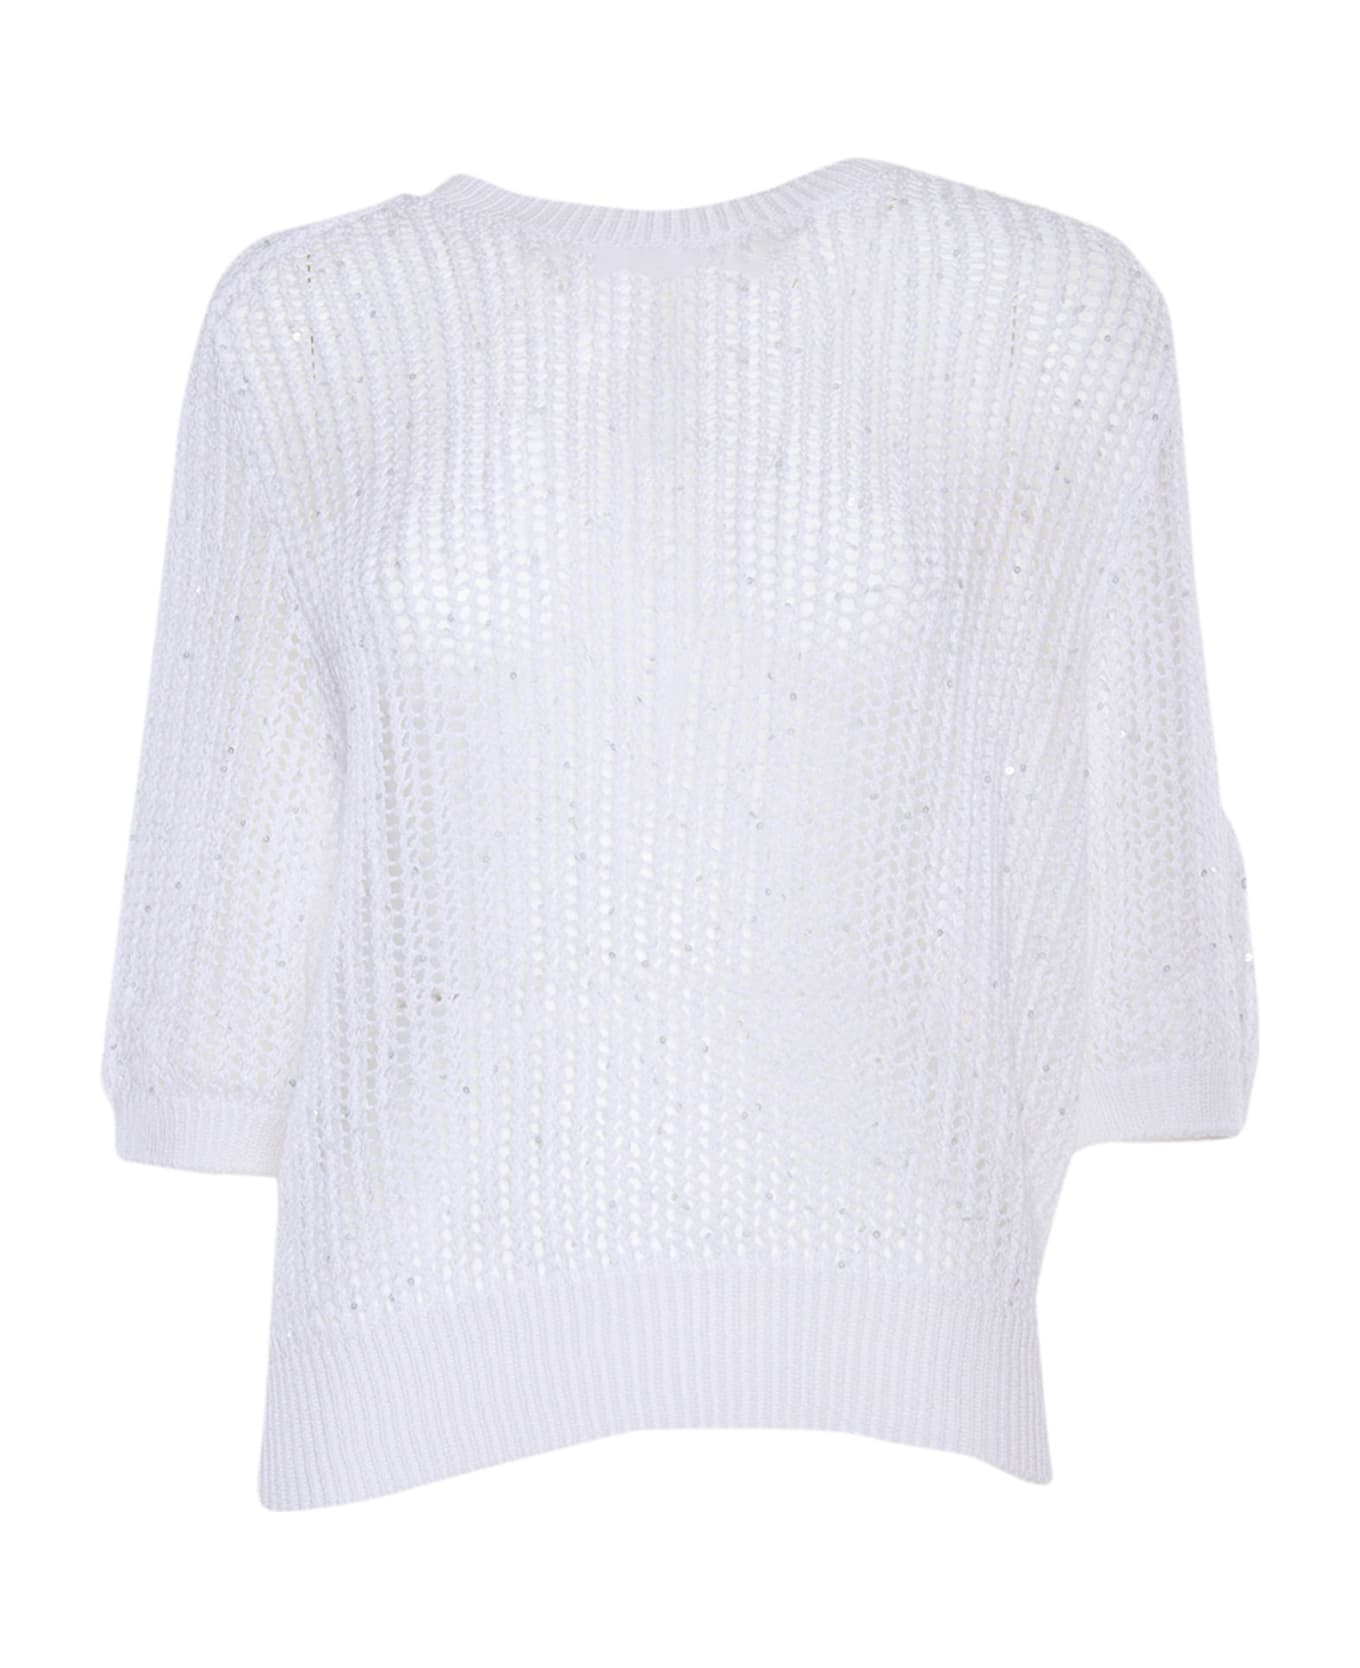 Peserico Knitted Sweater | italist